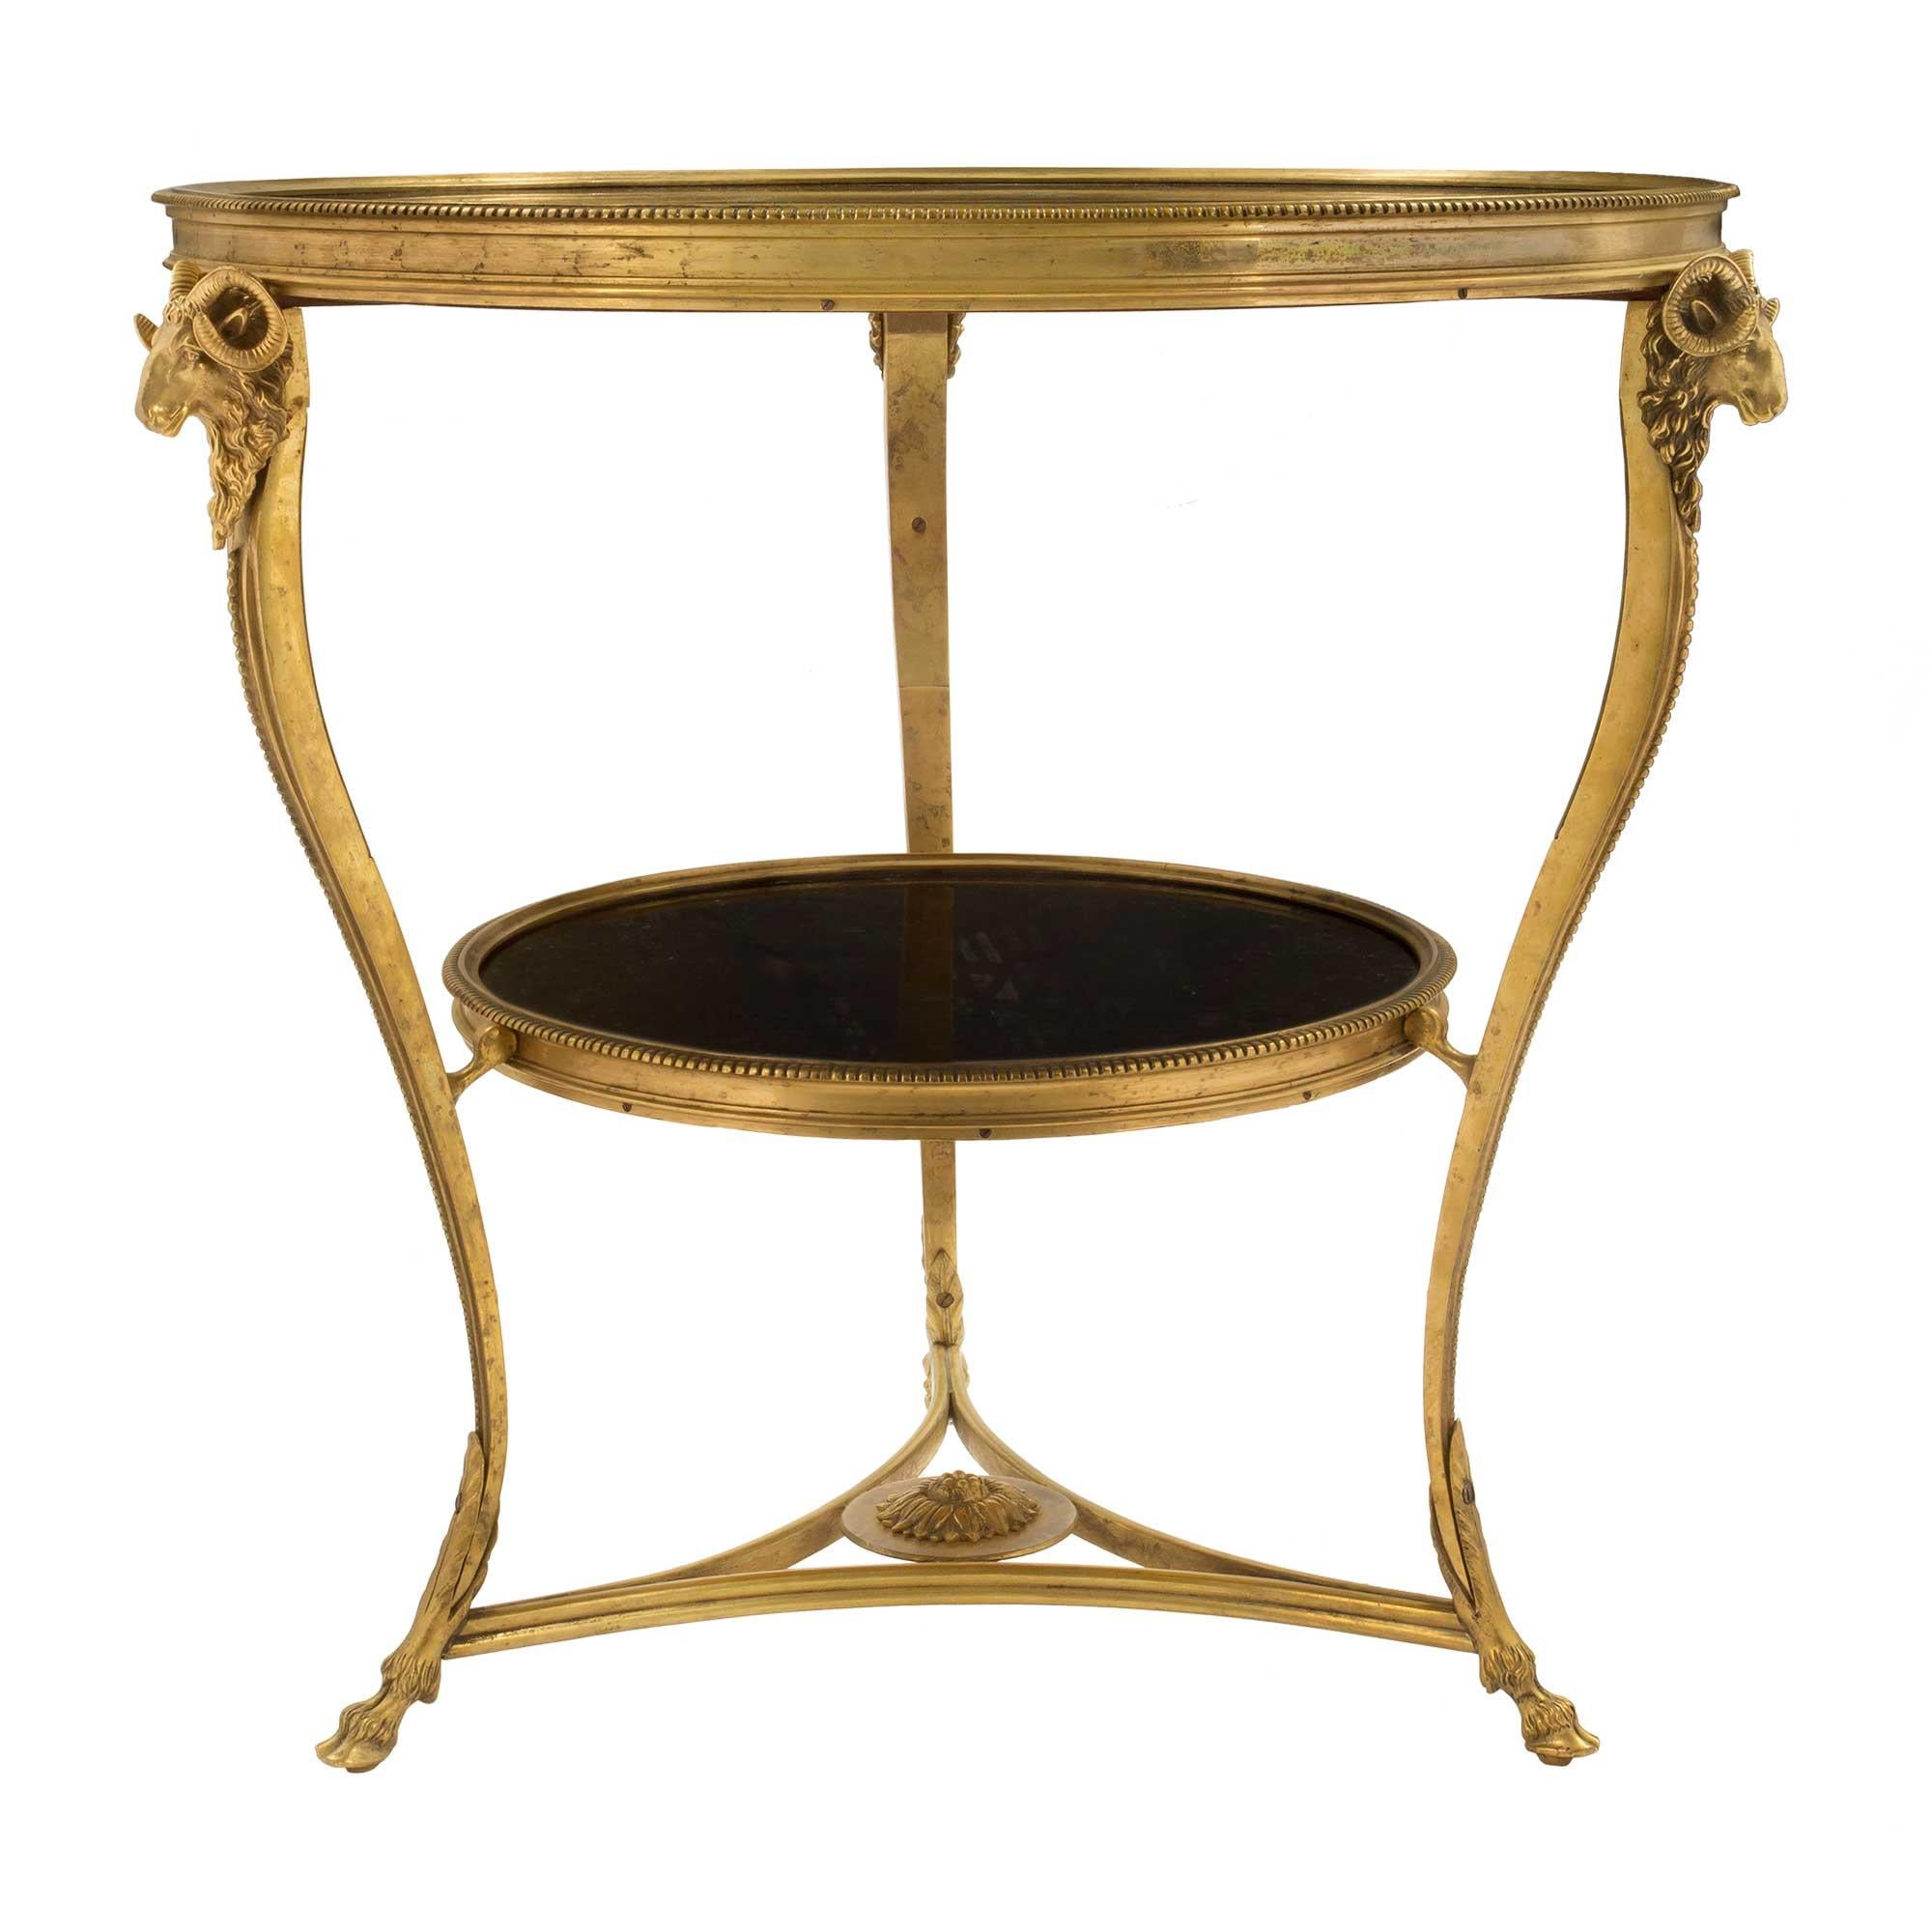 A most elegant and high quality pair of French 19th century Louis XVI style ormolu and black Belgium marble Guéridons. Each side table is raised by handsome and detailed hoof feet adorned with large acanthus leaves joined by a triangular stretcher